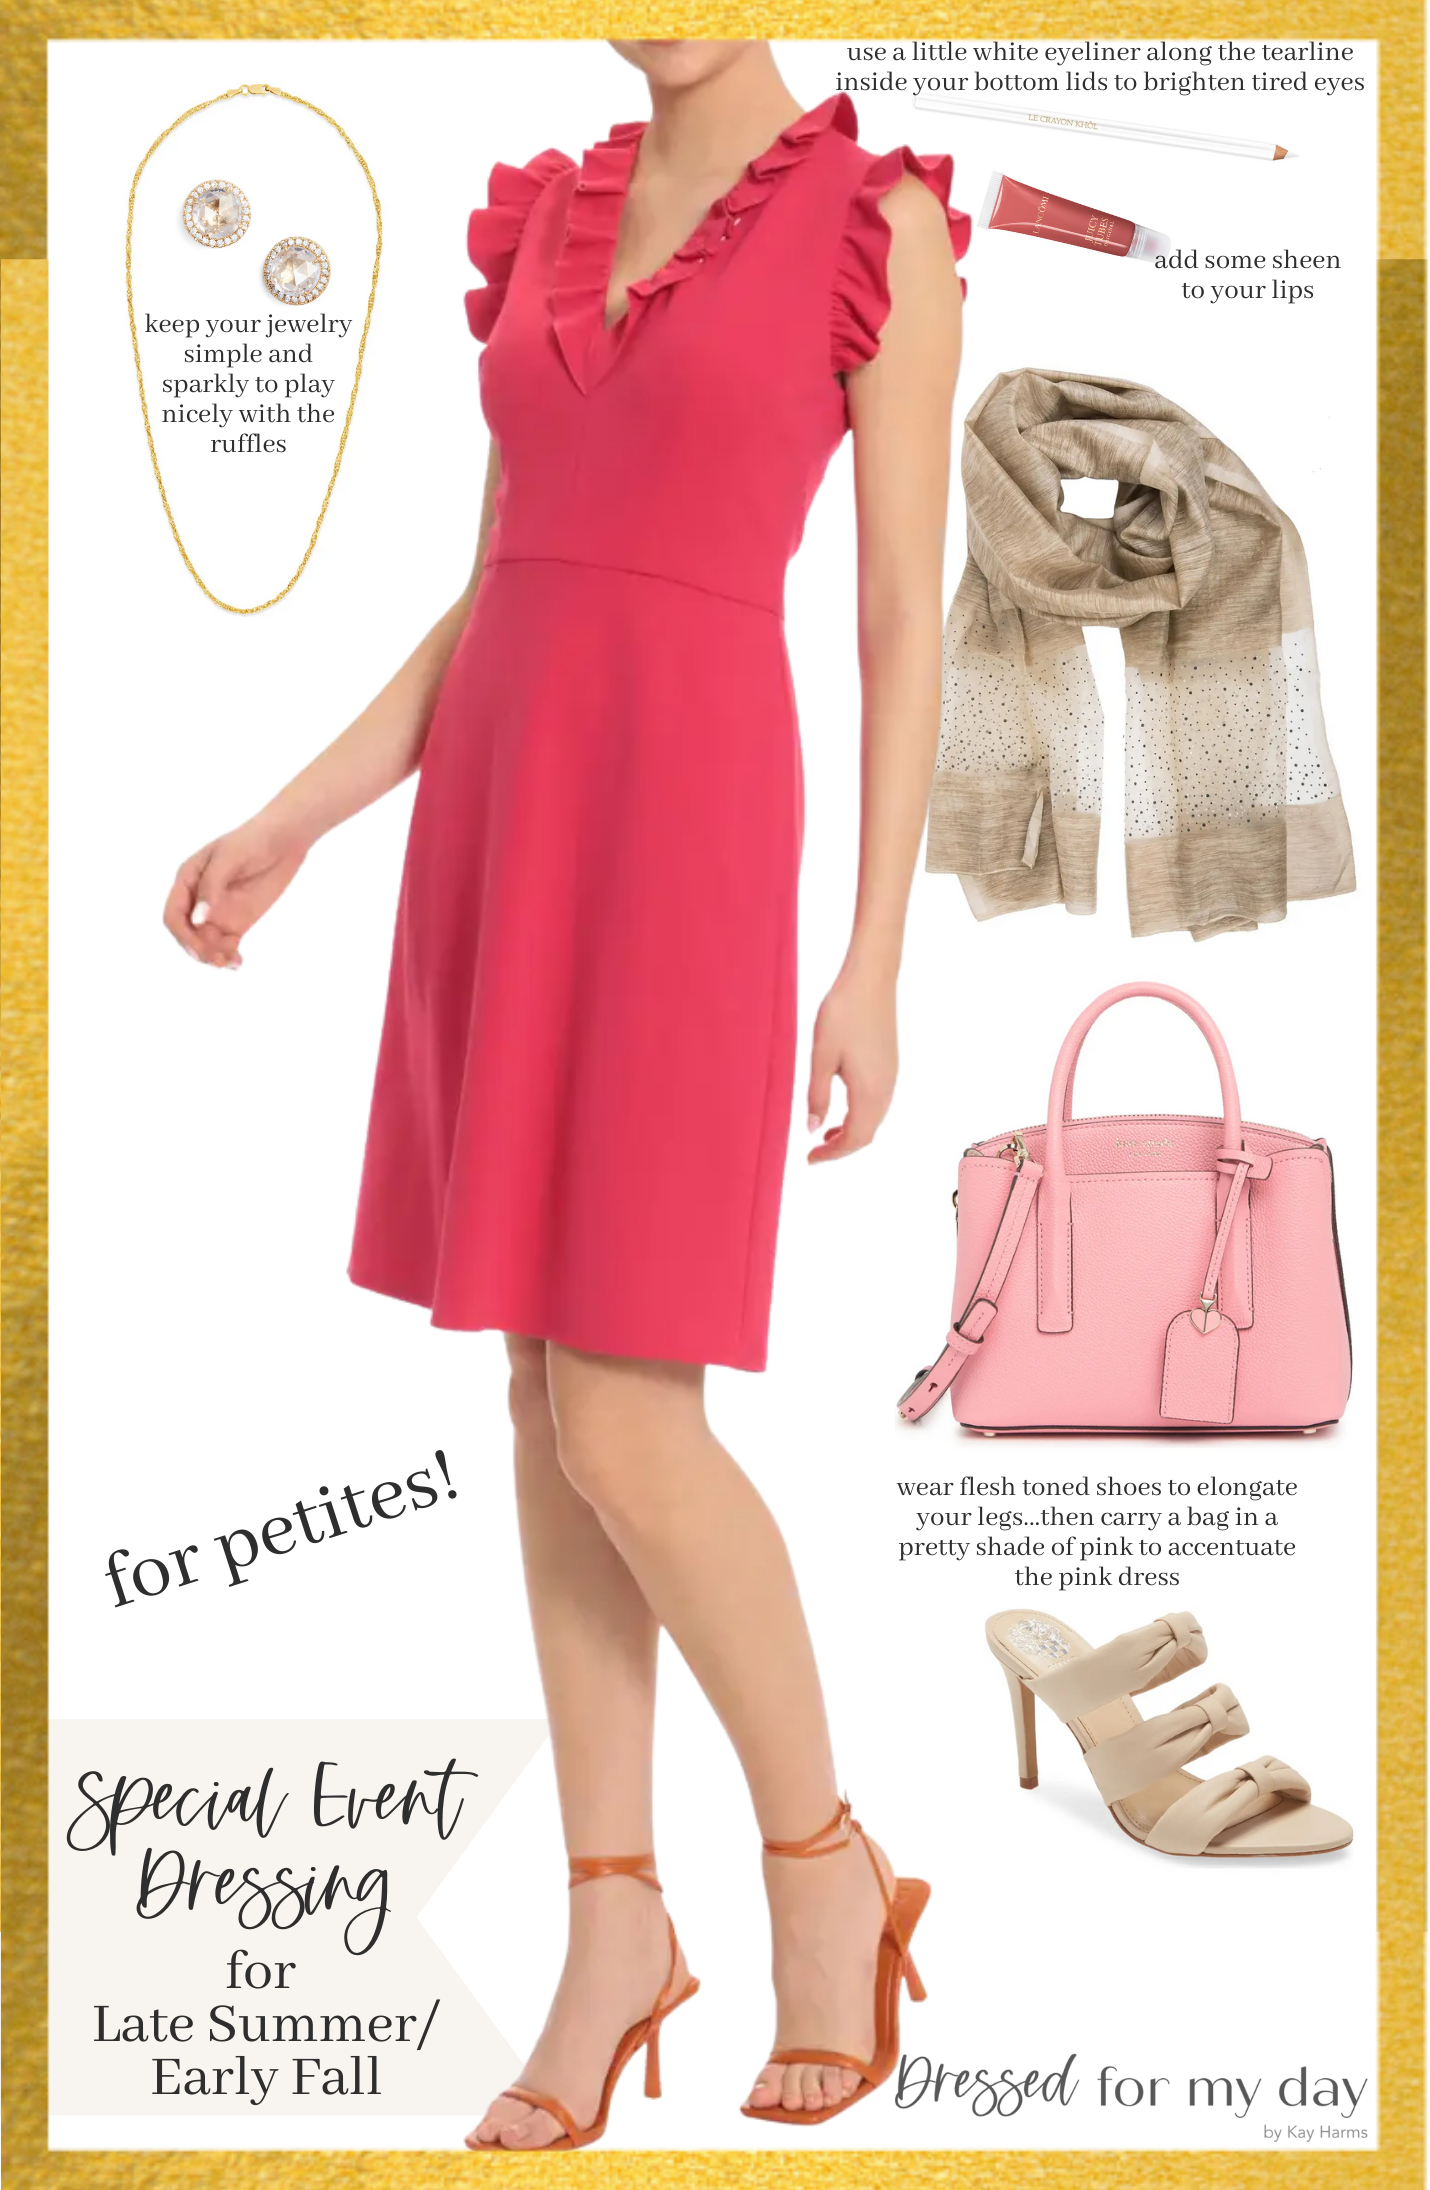 Petite Pink Dress for an Afternoon Wedding